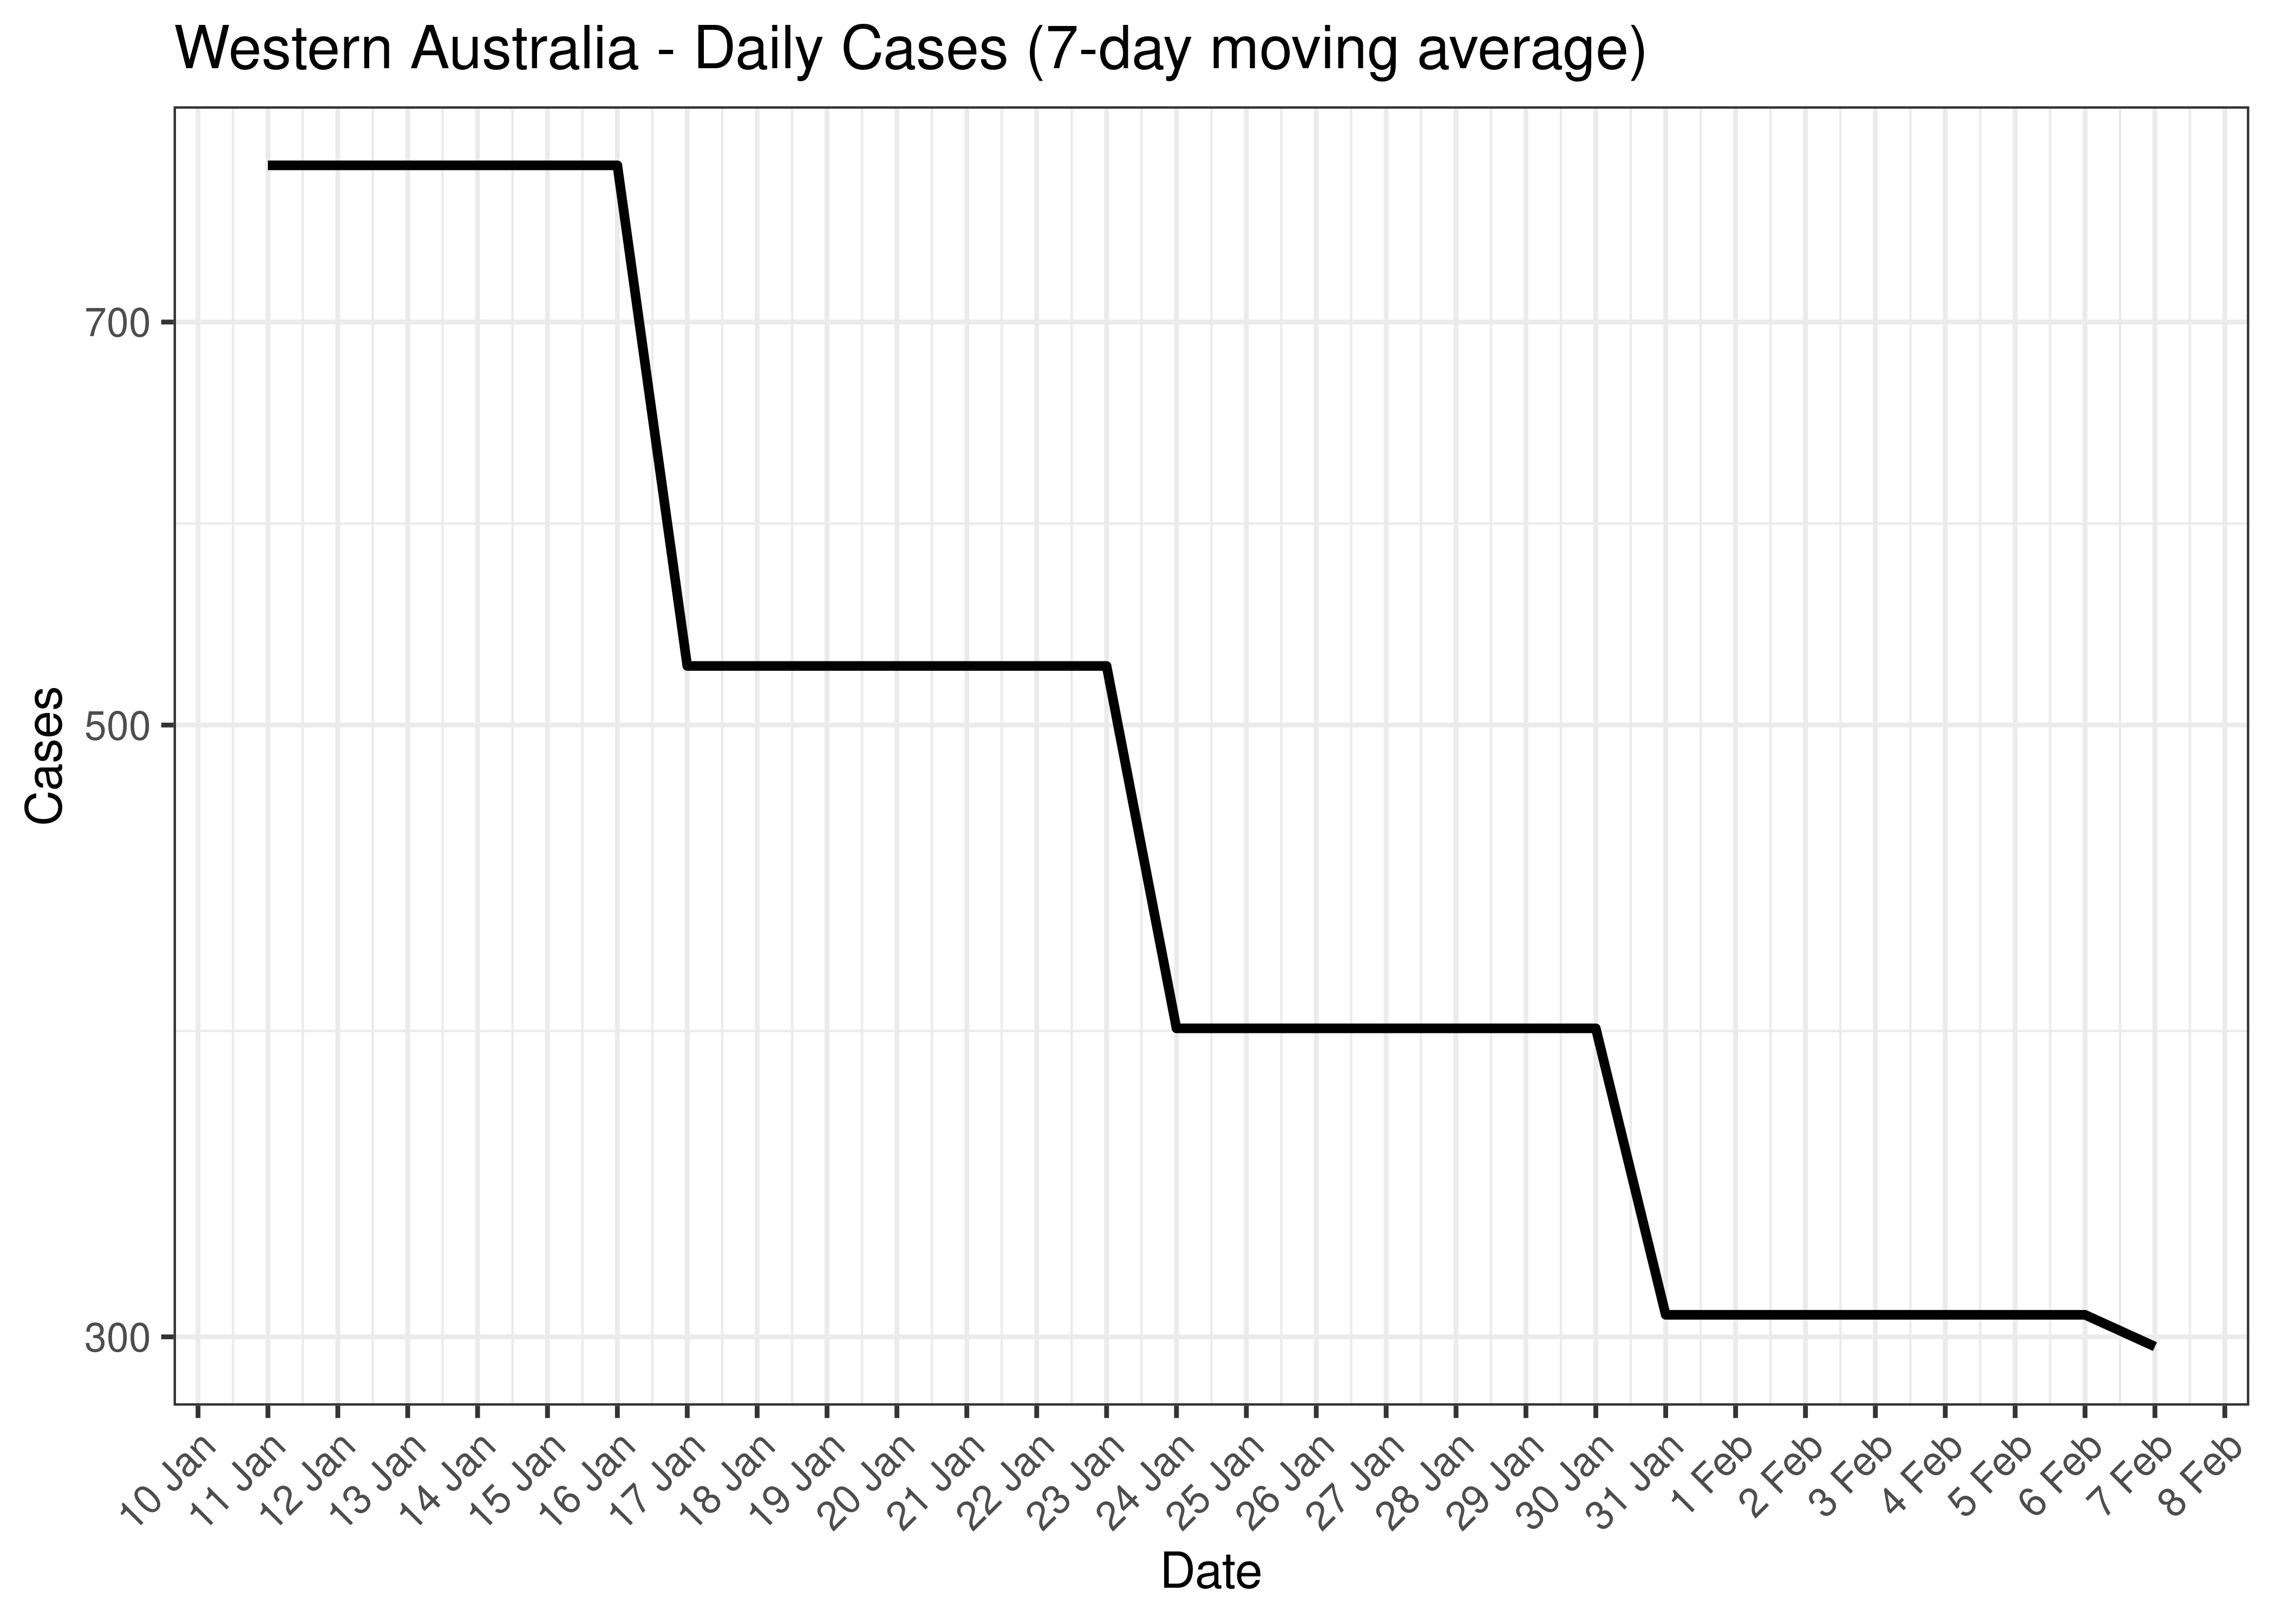 Victoria - Daily Ventilator Counts for Last 30-days (7-day moving average)